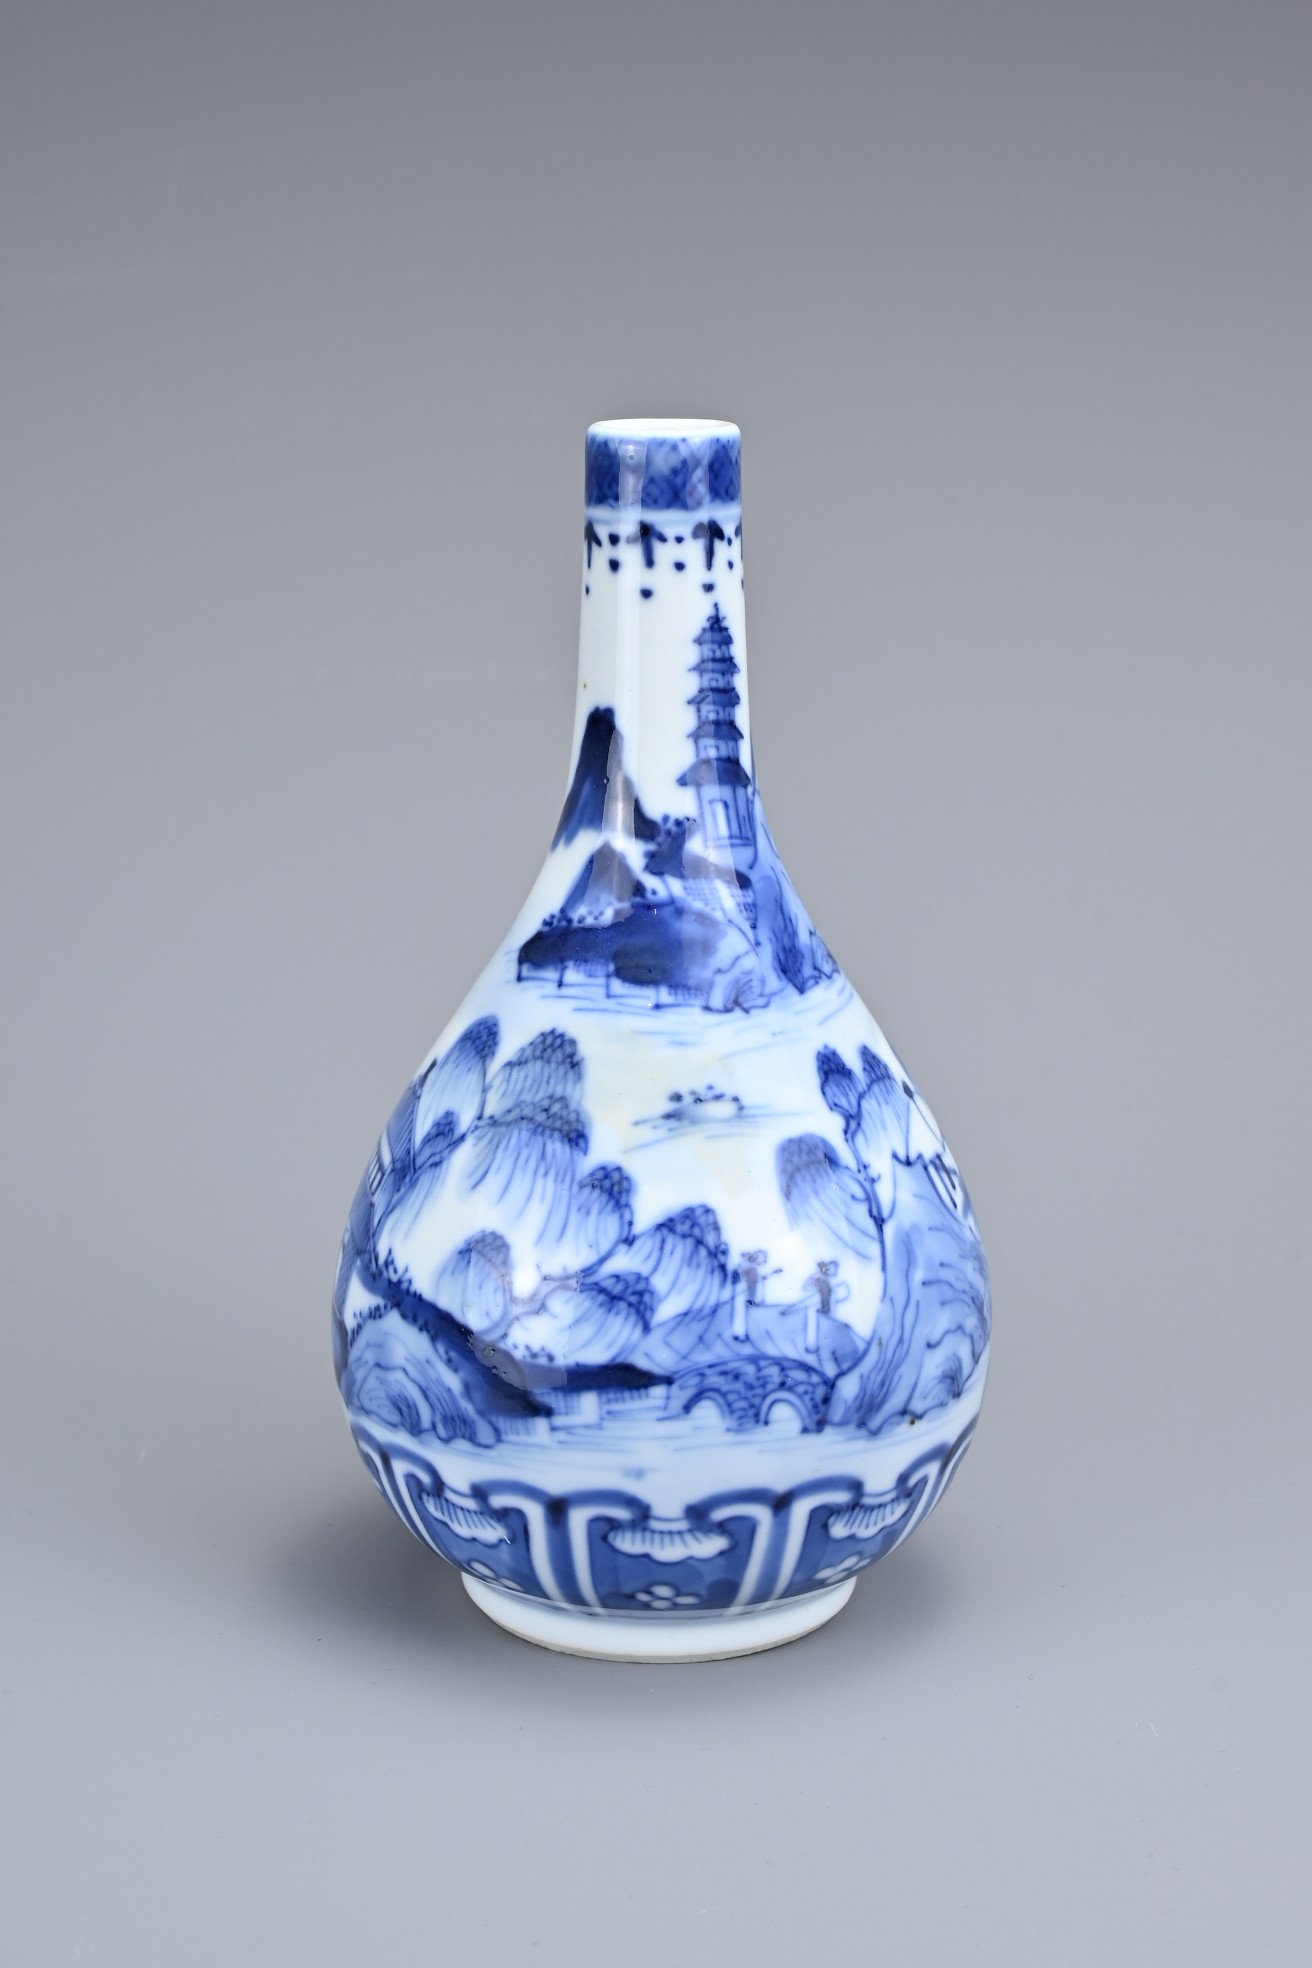 A CHINESE BLUE AND WHITE PORCELAIN BOTTLE VASE, LATE QING DYNASTY. Decorated with coastal